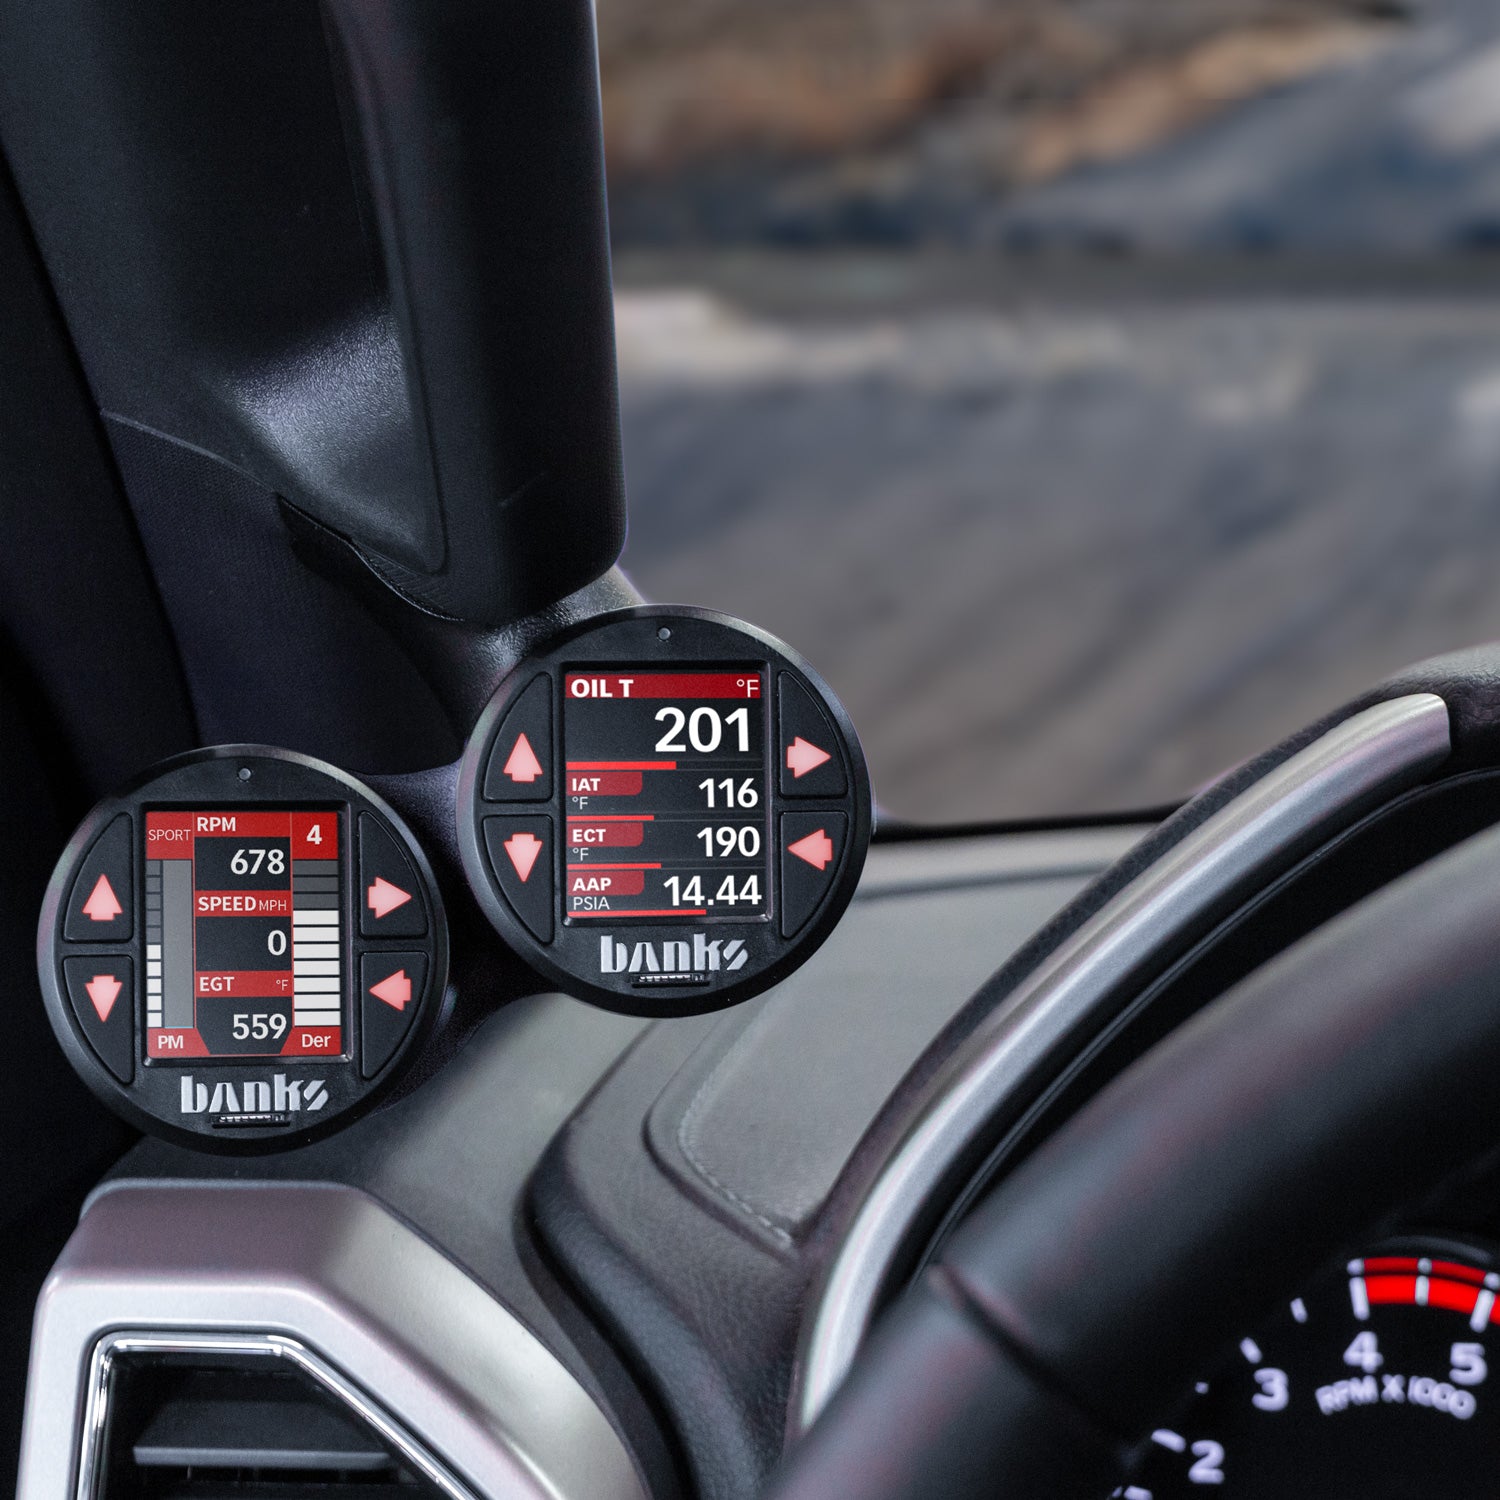 Two iDash gauges installed in Ford dual stealth pod